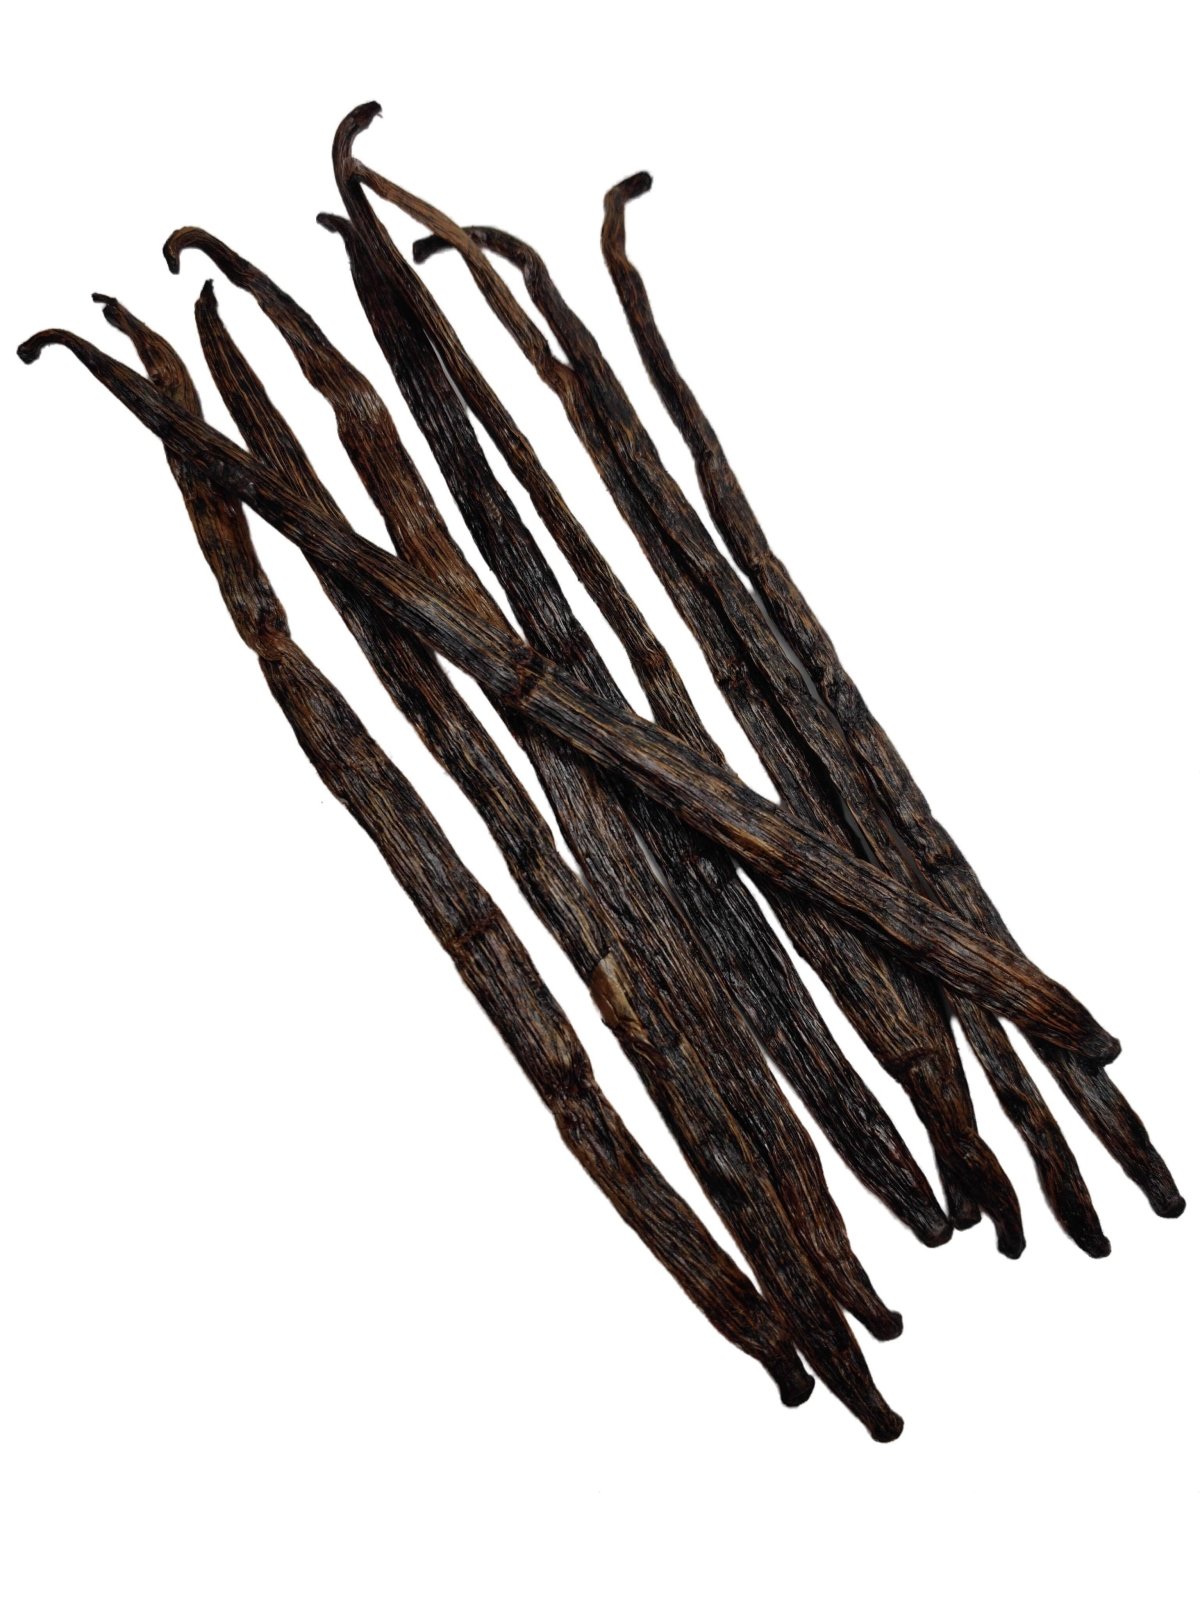 Co-op Pricing Ugandan Extract Grade-B Vanilla Beans (Per Ounce)<br><br>Minimum Order quantity for this Co-op price is 2 ounces.